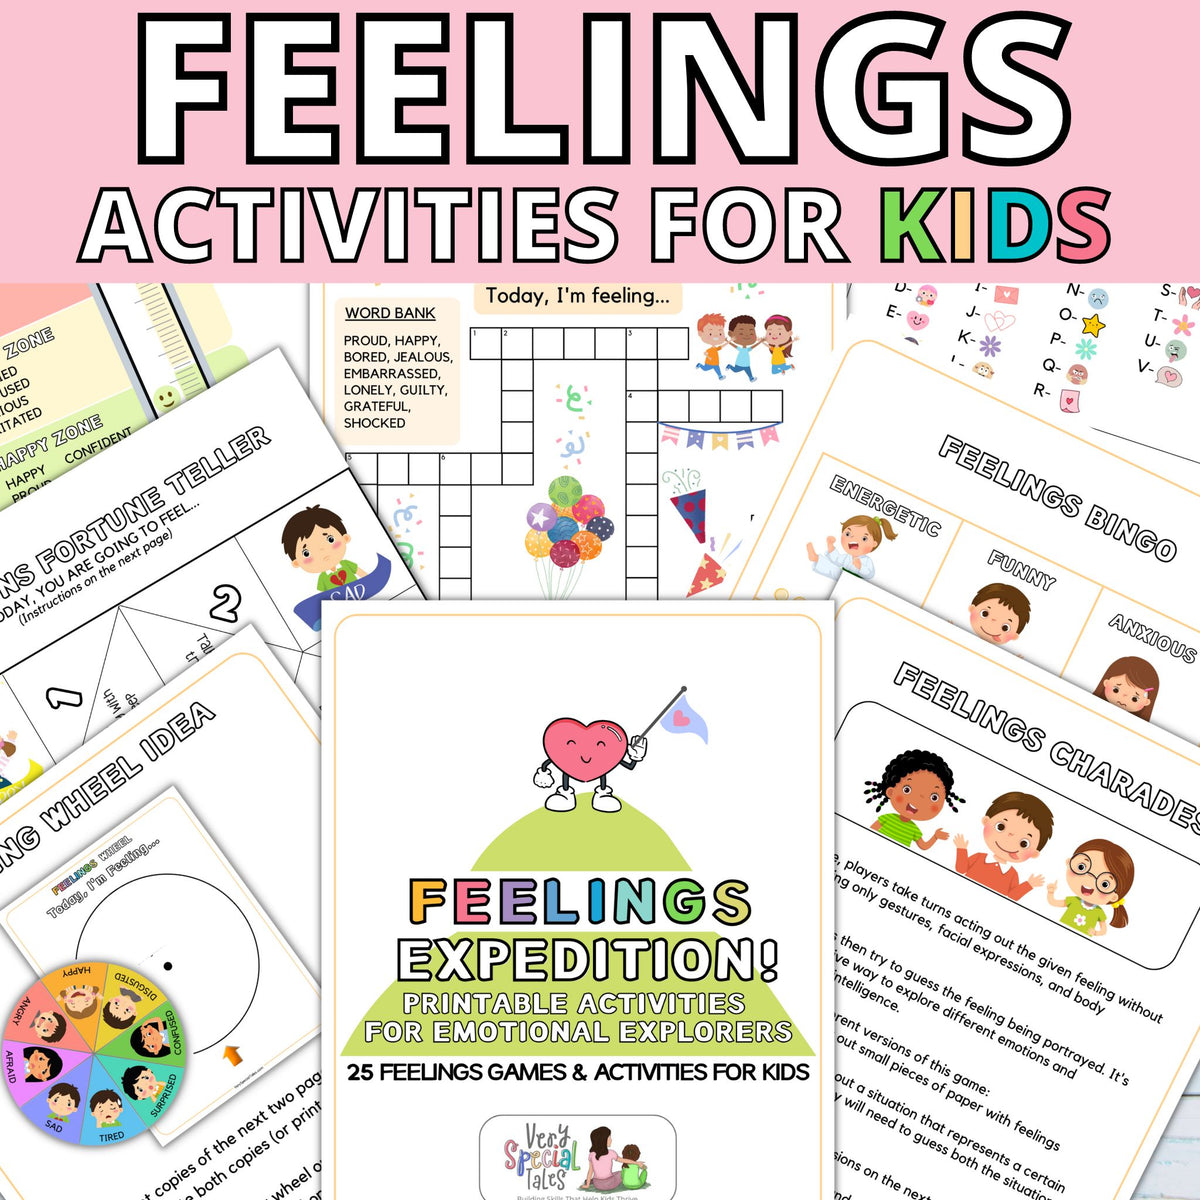 Activity and game worksheets, including colouring pages, crosswords, journal prompts and more.